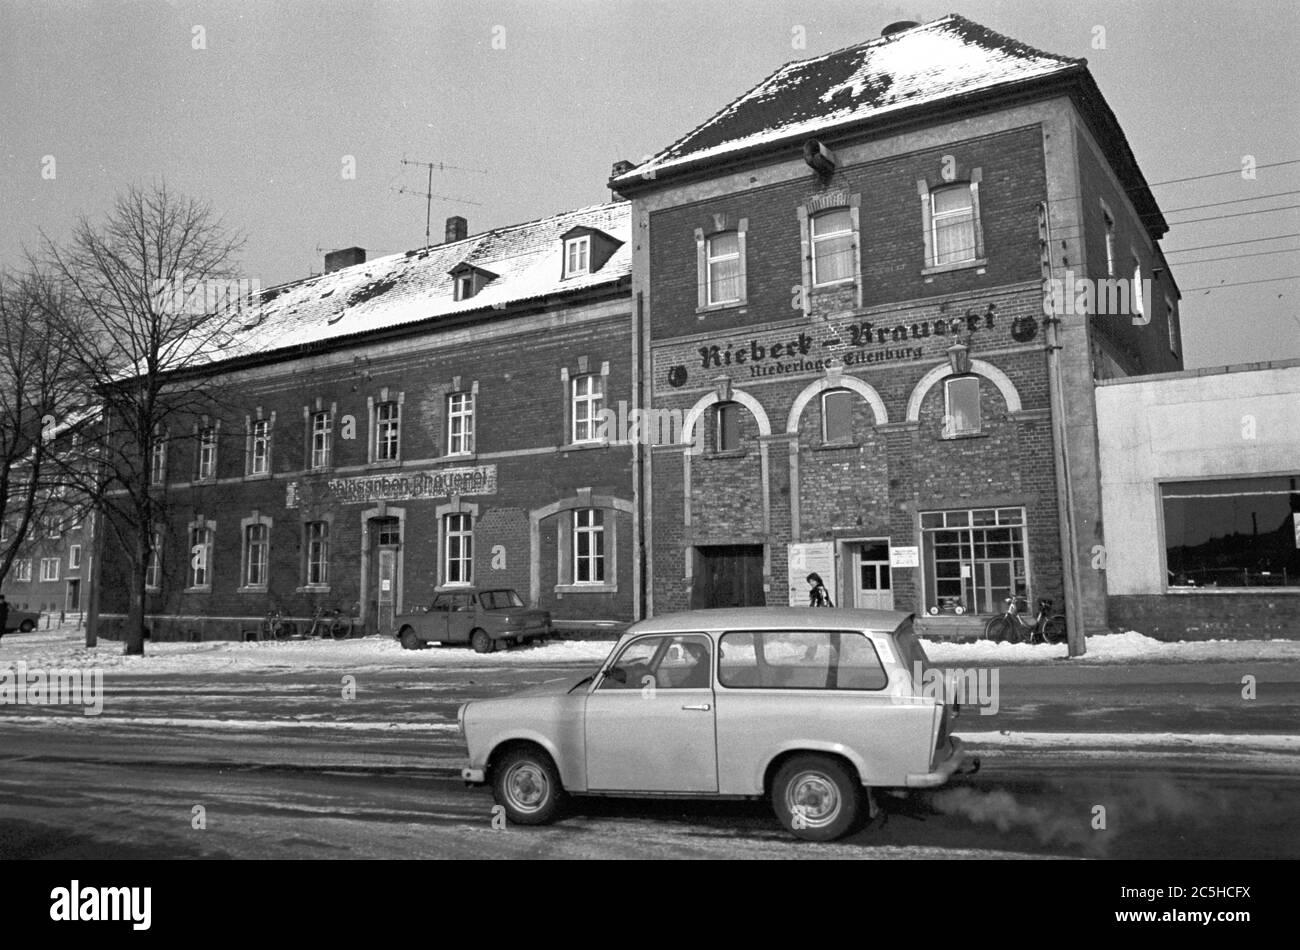 30 November 1984, Saxony, Eilenburg: The historic buildings of the former (Leipzig) Riebeck brewery (defeat of Eilenburg) were given a new 'purpose' - a lawnmower and bicycle workshop - in the mid-1980s through structural interventions and changes. A Wartburg stands in front of it, a Trabant drives by. Exact date of recording not known. Photo: Volkmar Heinz/dpa-Zentralbild/ZB Stock Photo